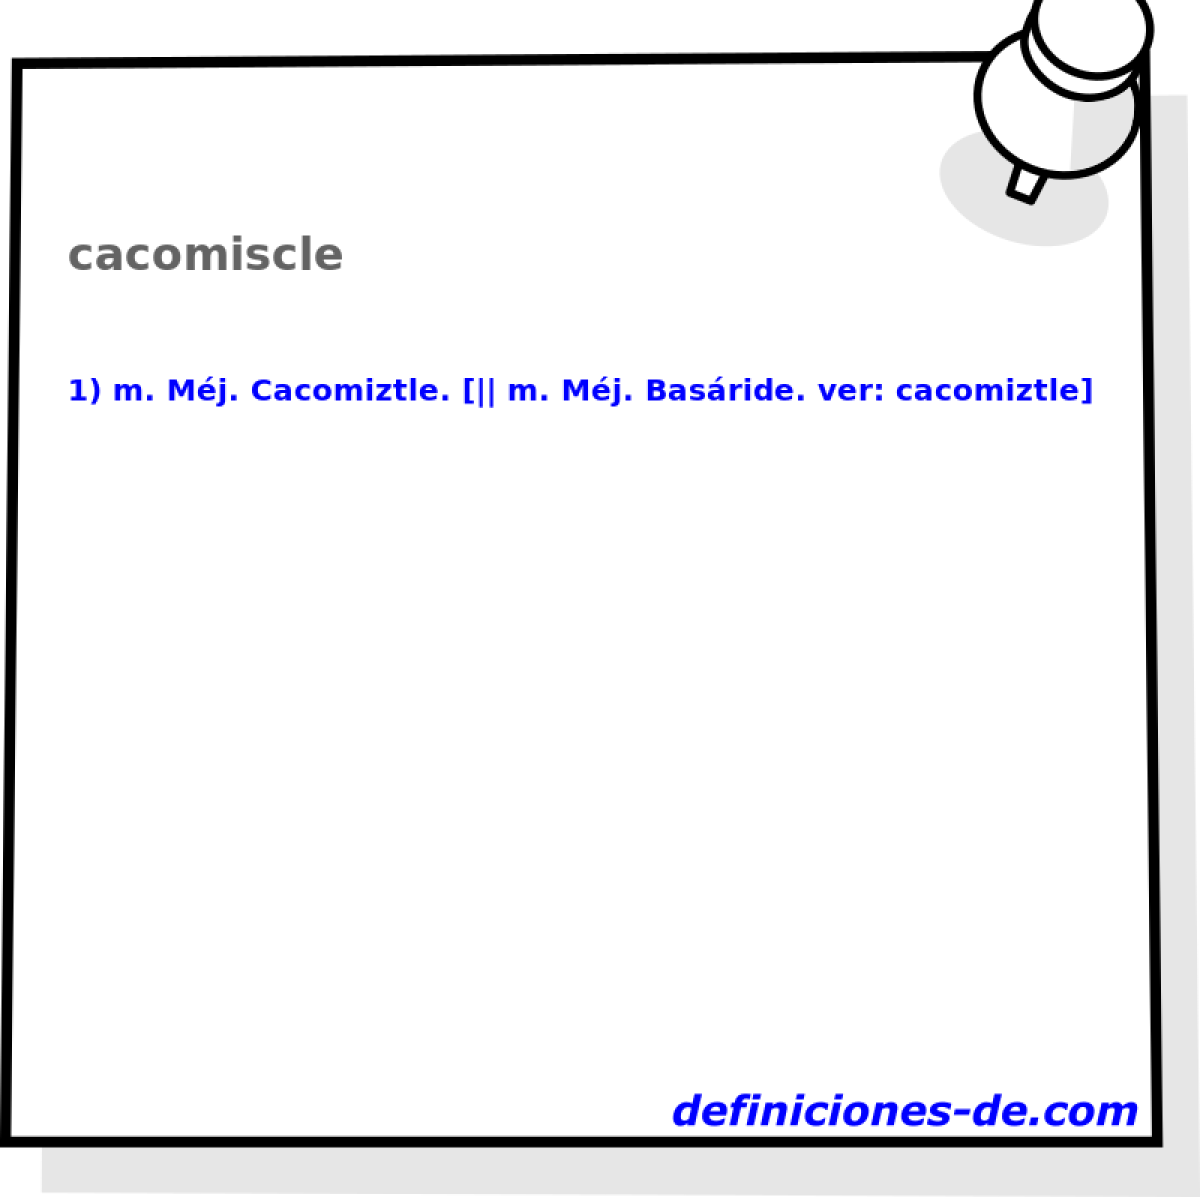 cacomiscle 